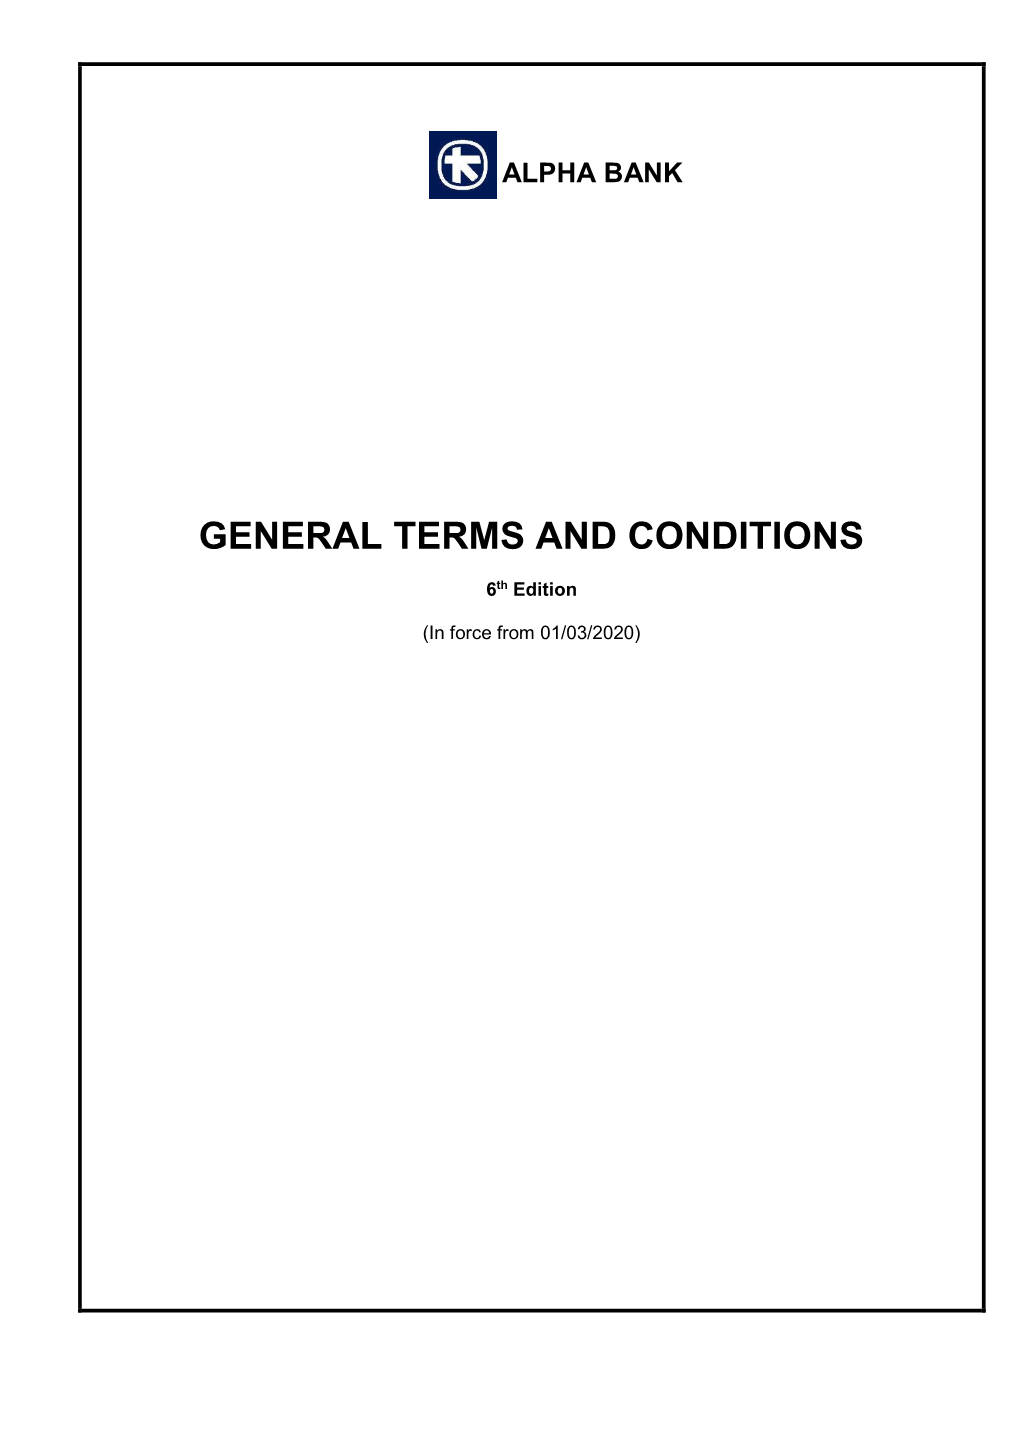 General Terms and Conditions